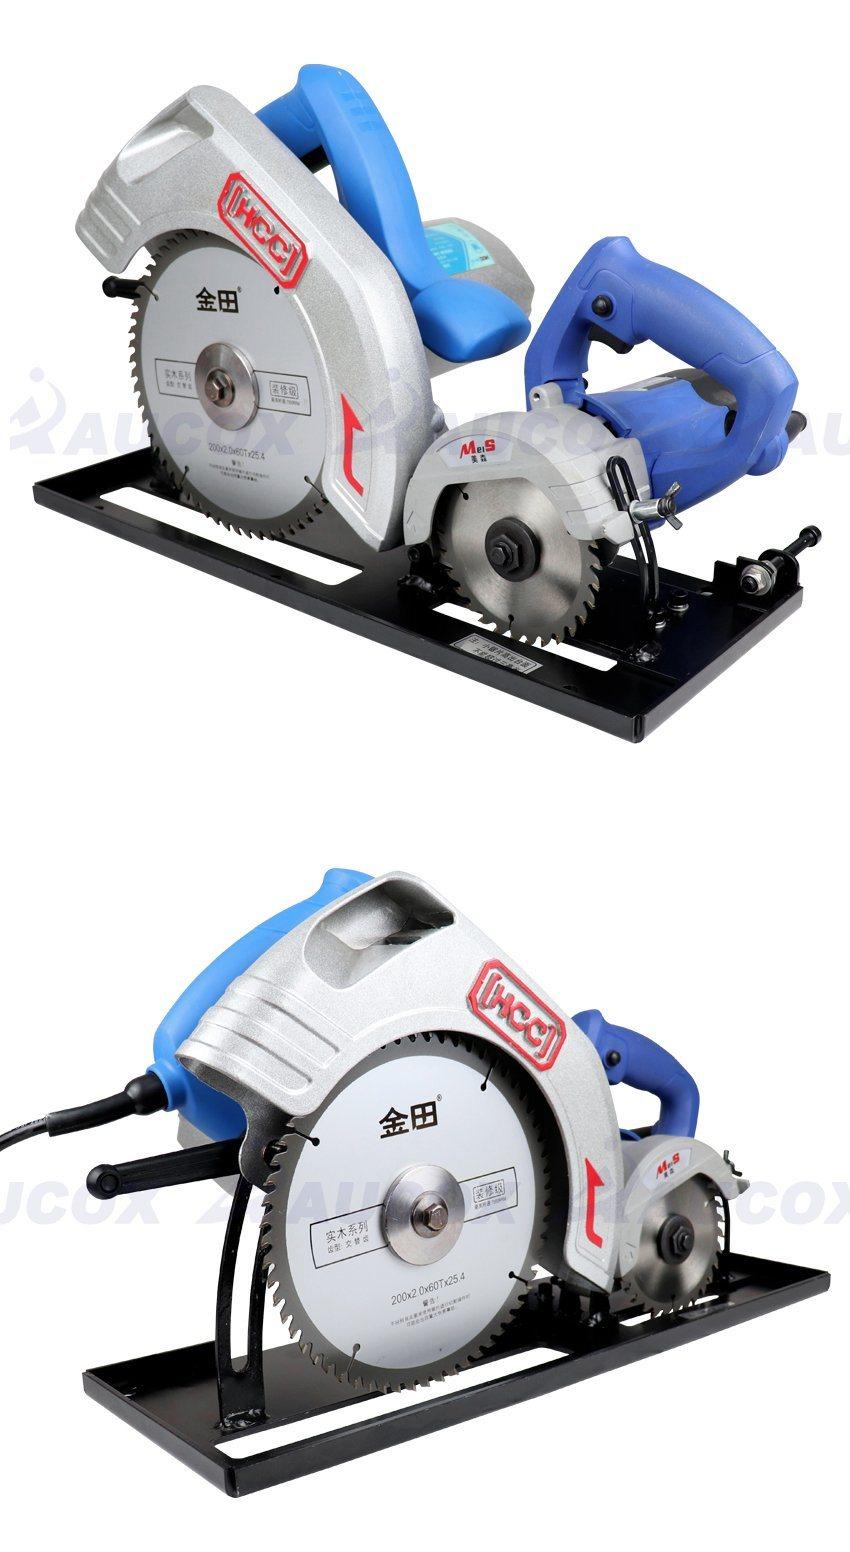 Mj09 Be Applicable Differents Boards Useful Sliding Panel Saw Machine